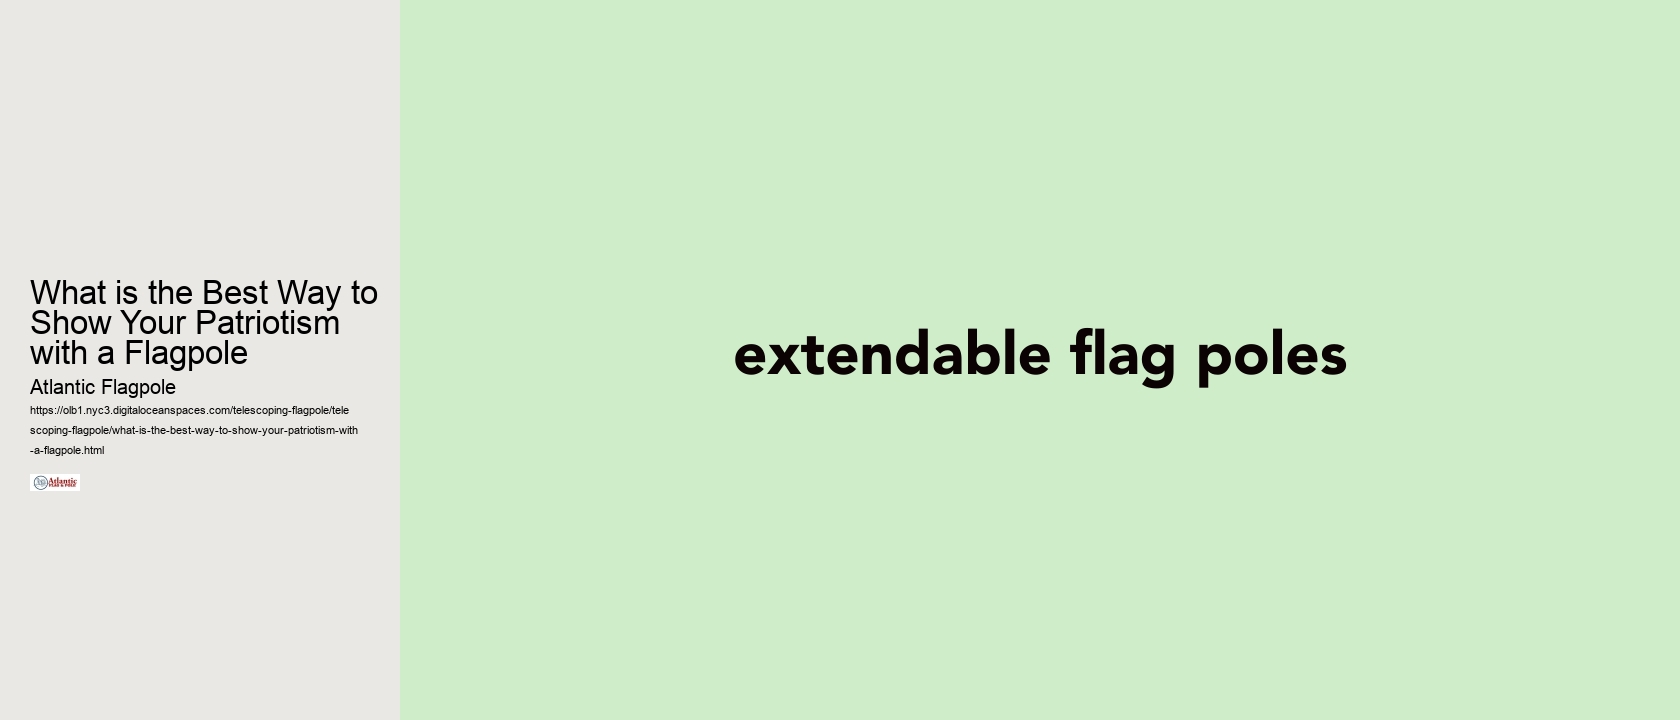 What is the Best Way to Show Your Patriotism with a Flagpole